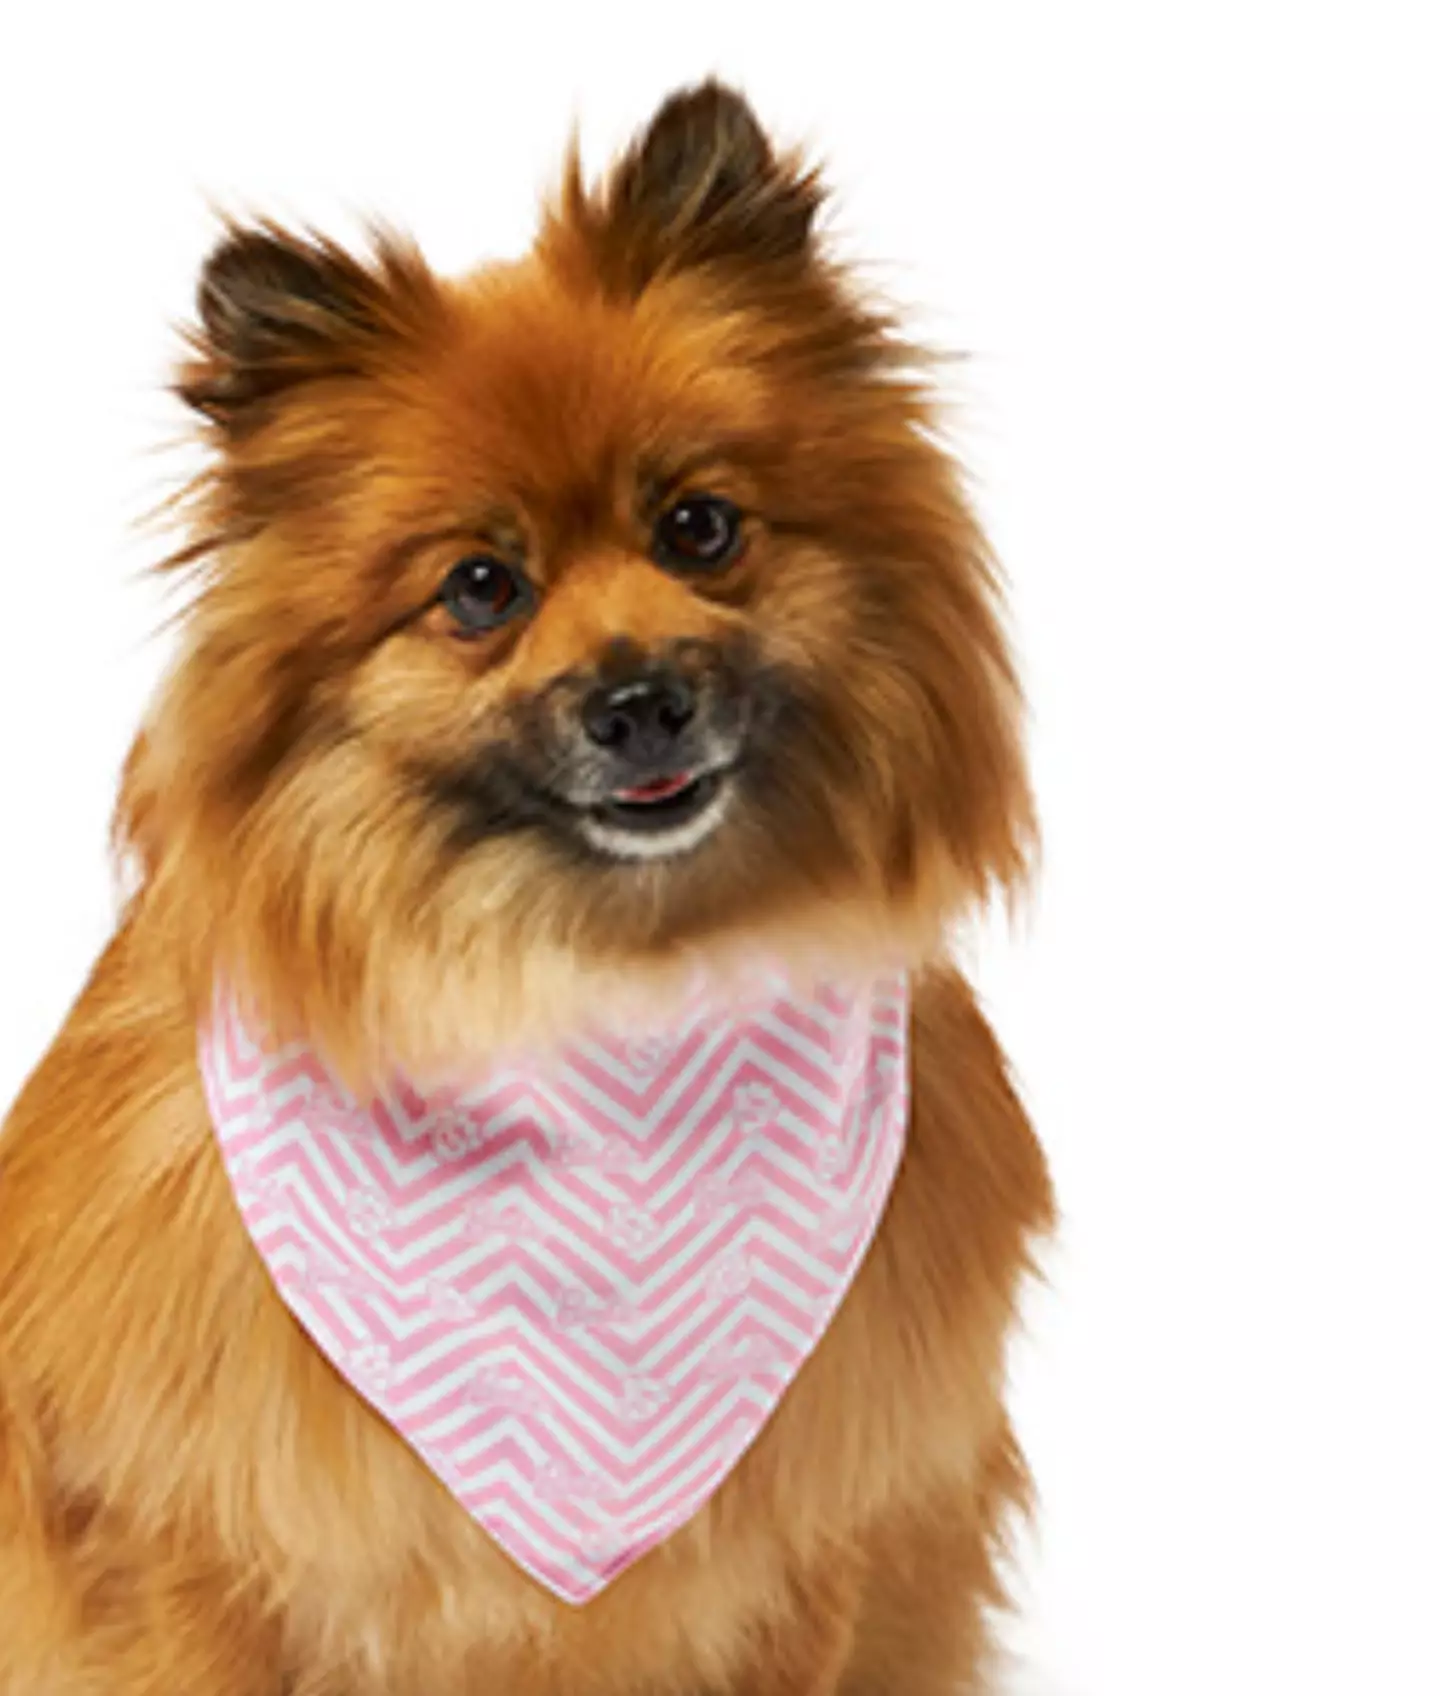 Pets at Home have launched a Barbie-inspired range.